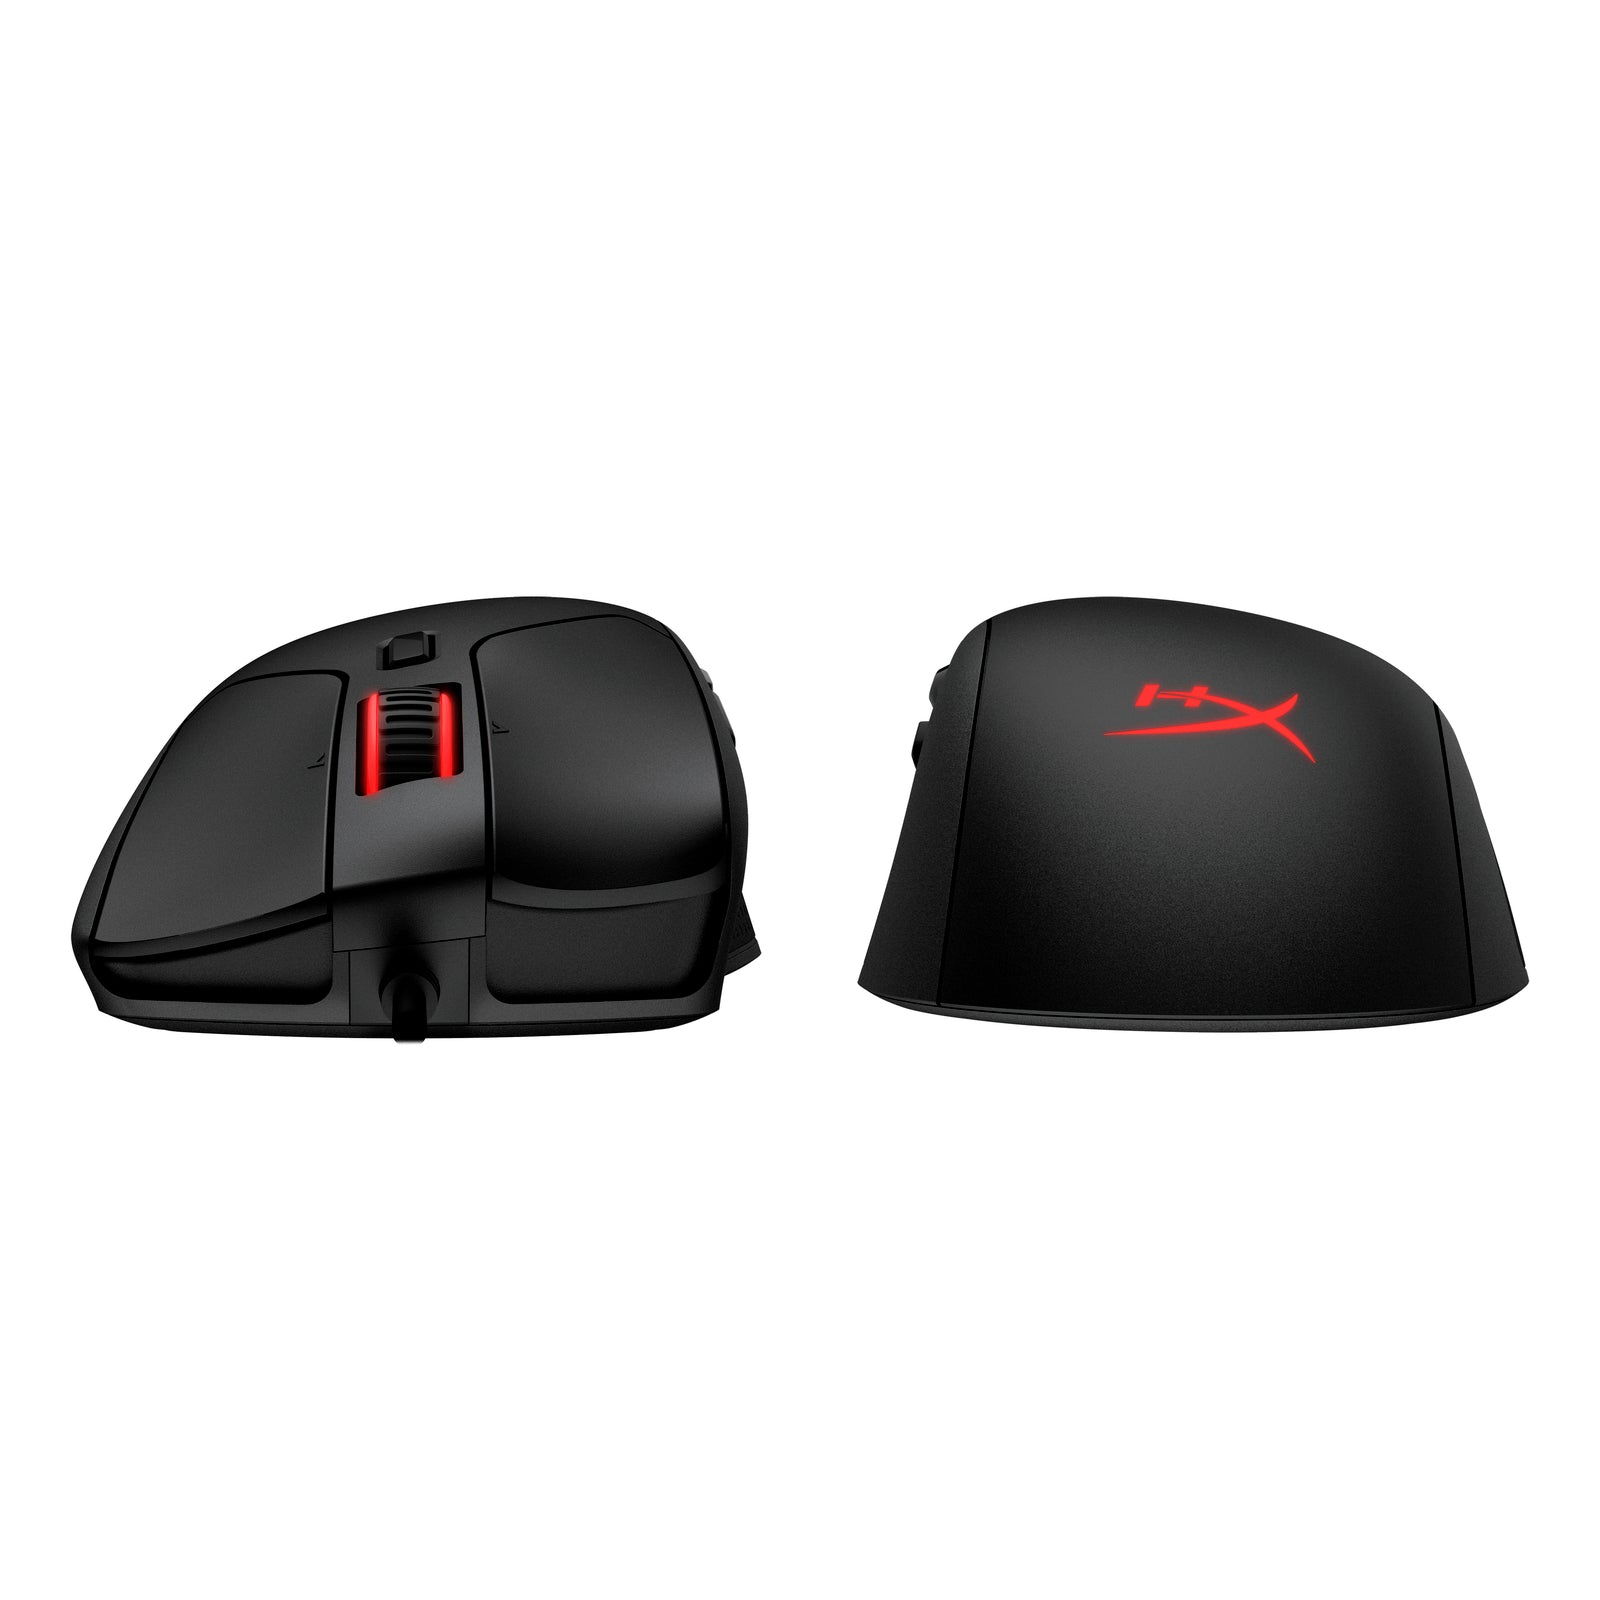 HyperX Pulsefire Raid Gaming Mouse Showing back and front sides